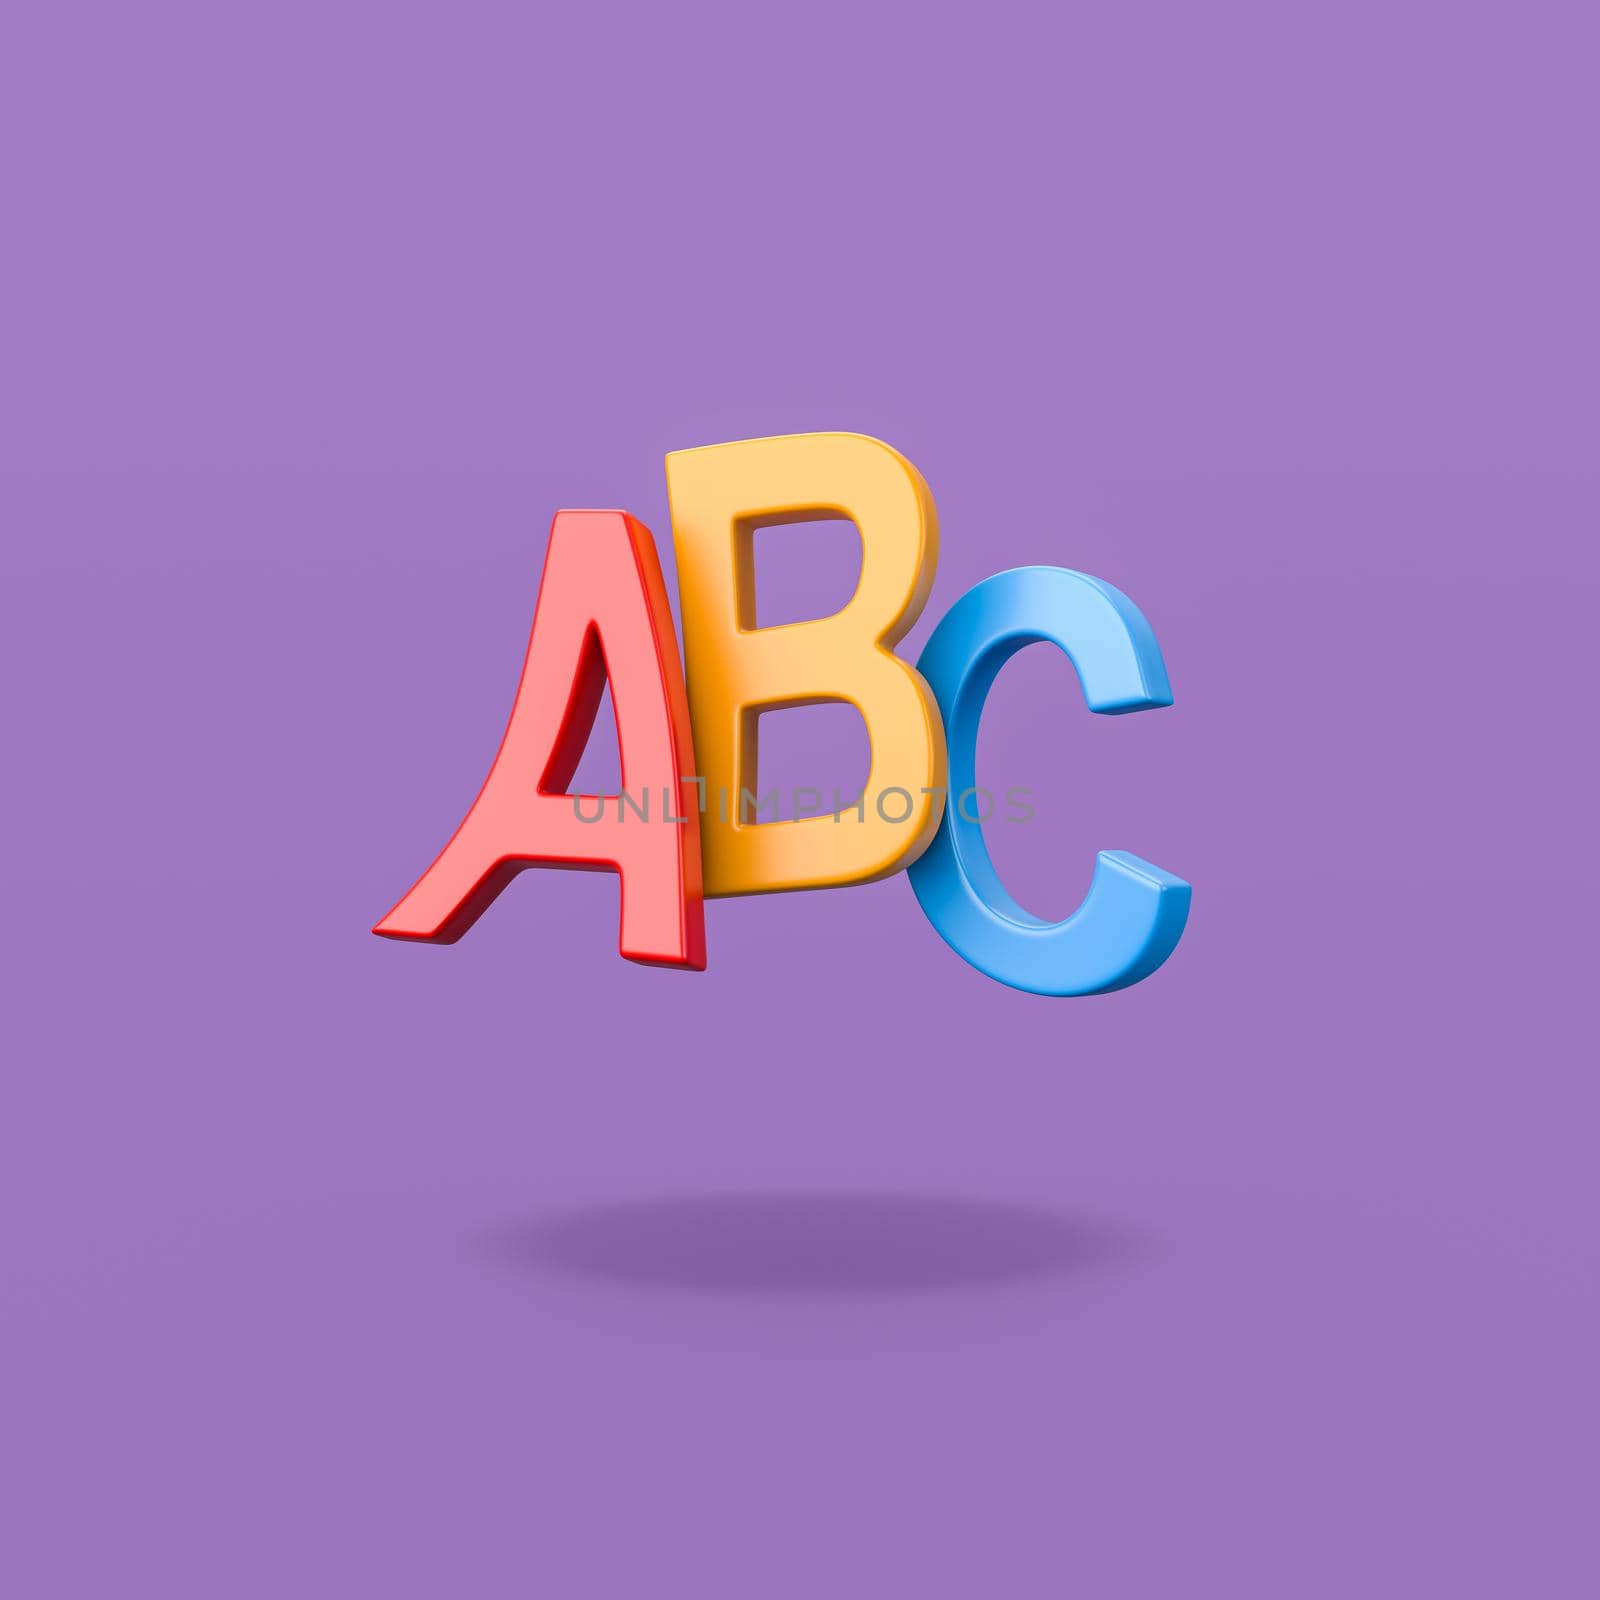 ABC Funny Text on Purple Background by make